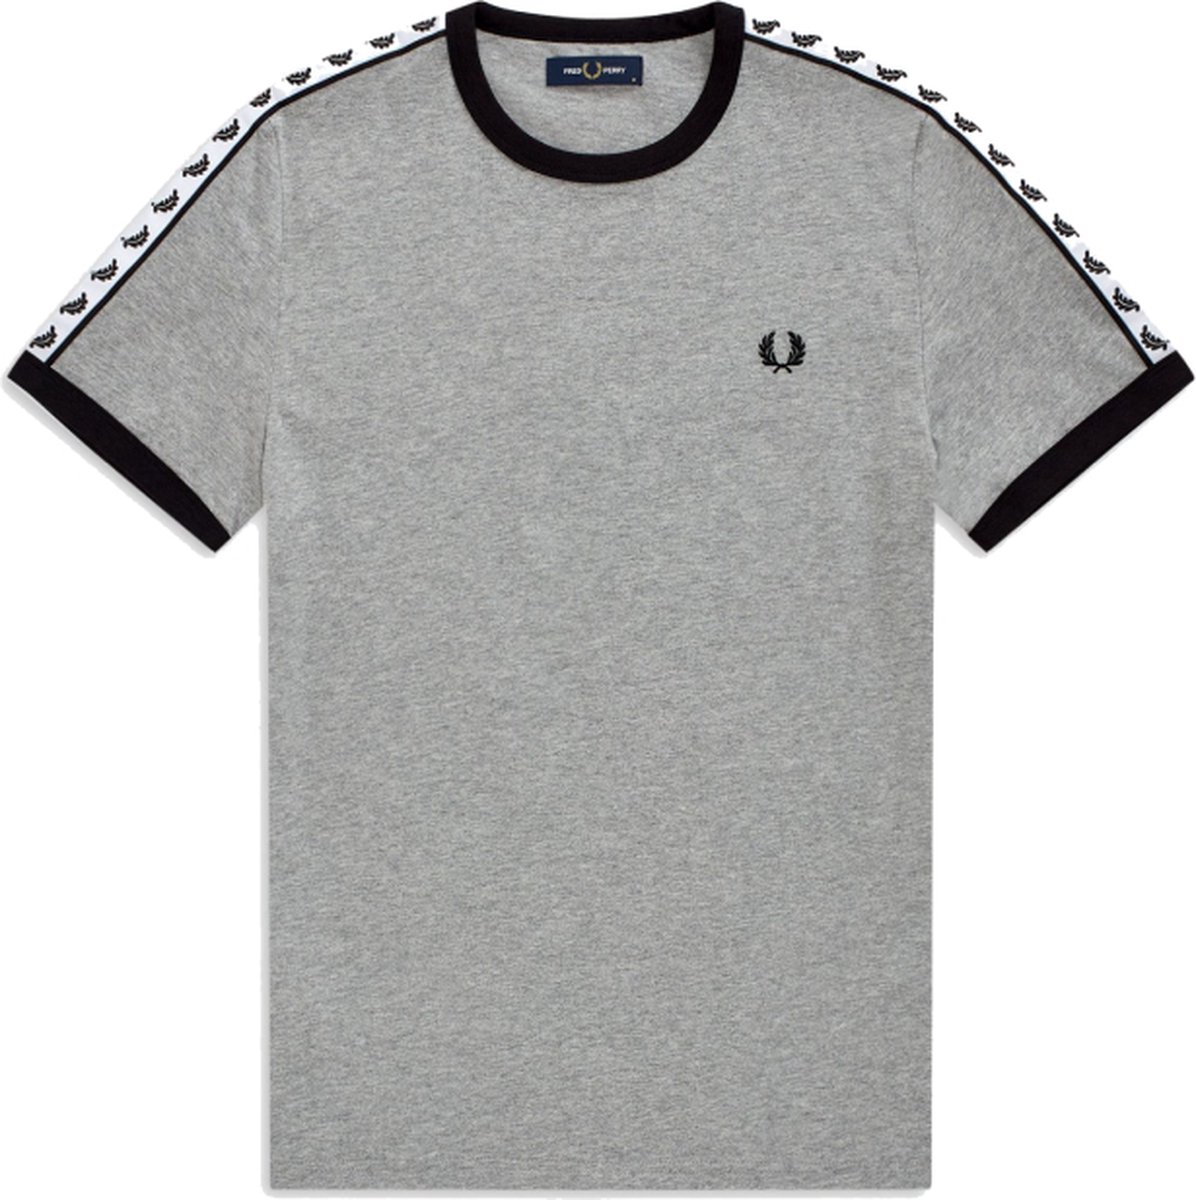 Fred Perry Taped Ringer Tee sportshirt heren antraciet